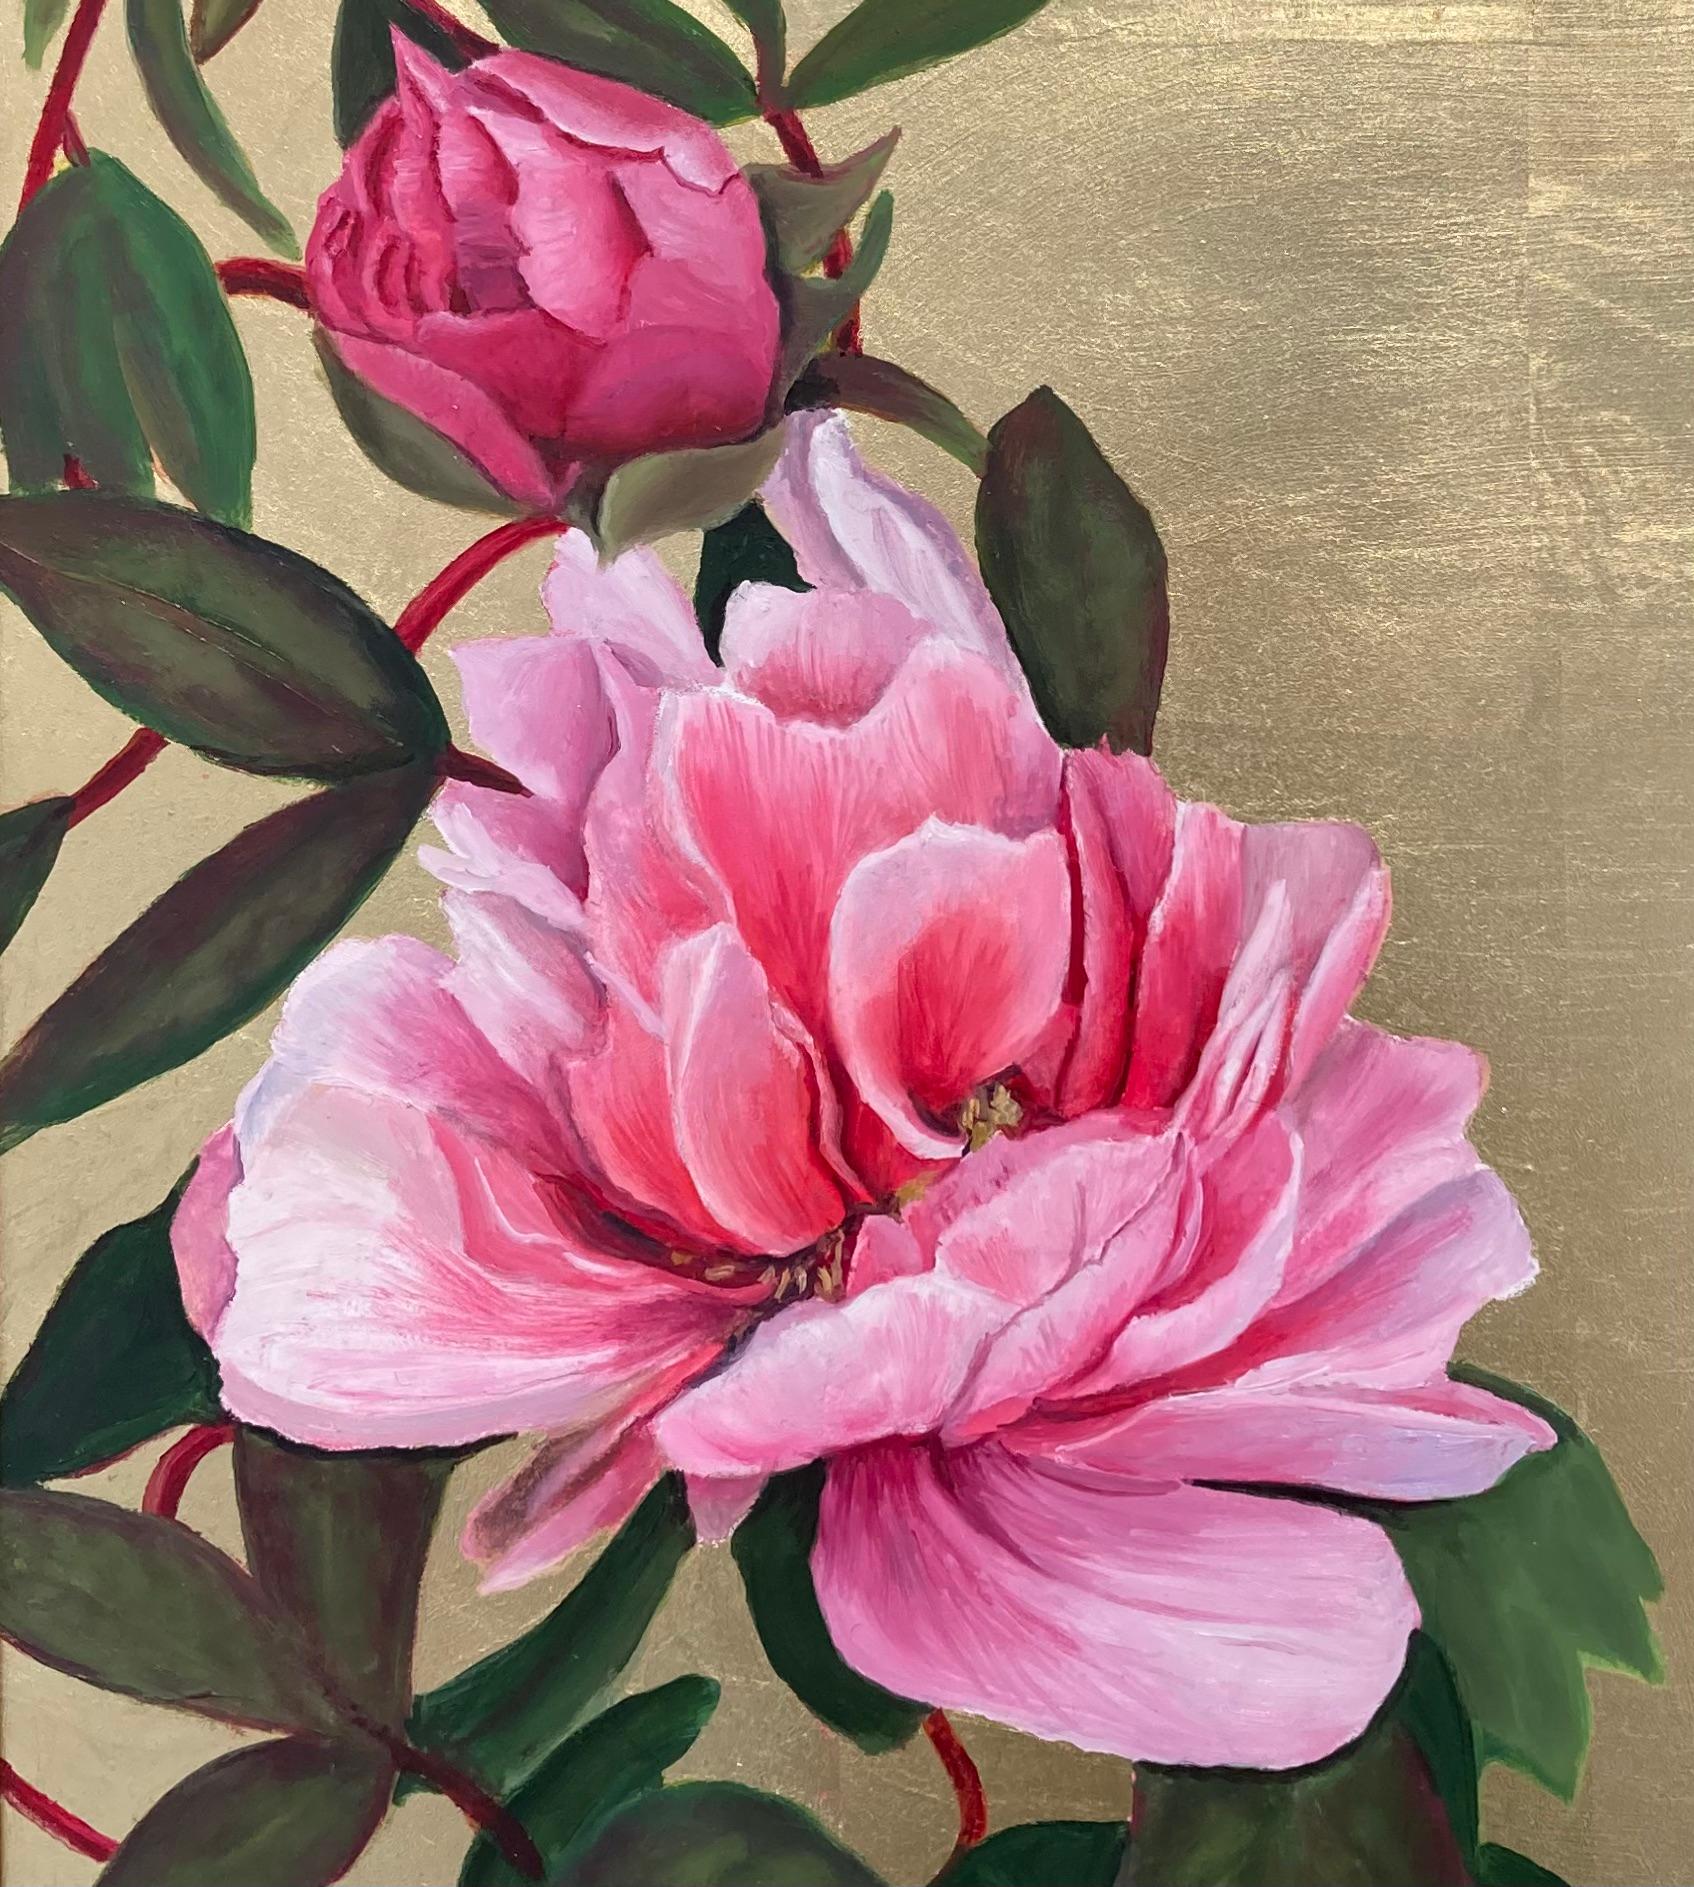 This painting is Inspired by a tree peony at Spetchley
Park Gardens whereartist is currently Artist in Residence.

Oil painting on board with imitation gold leaf
20 x 16 in
